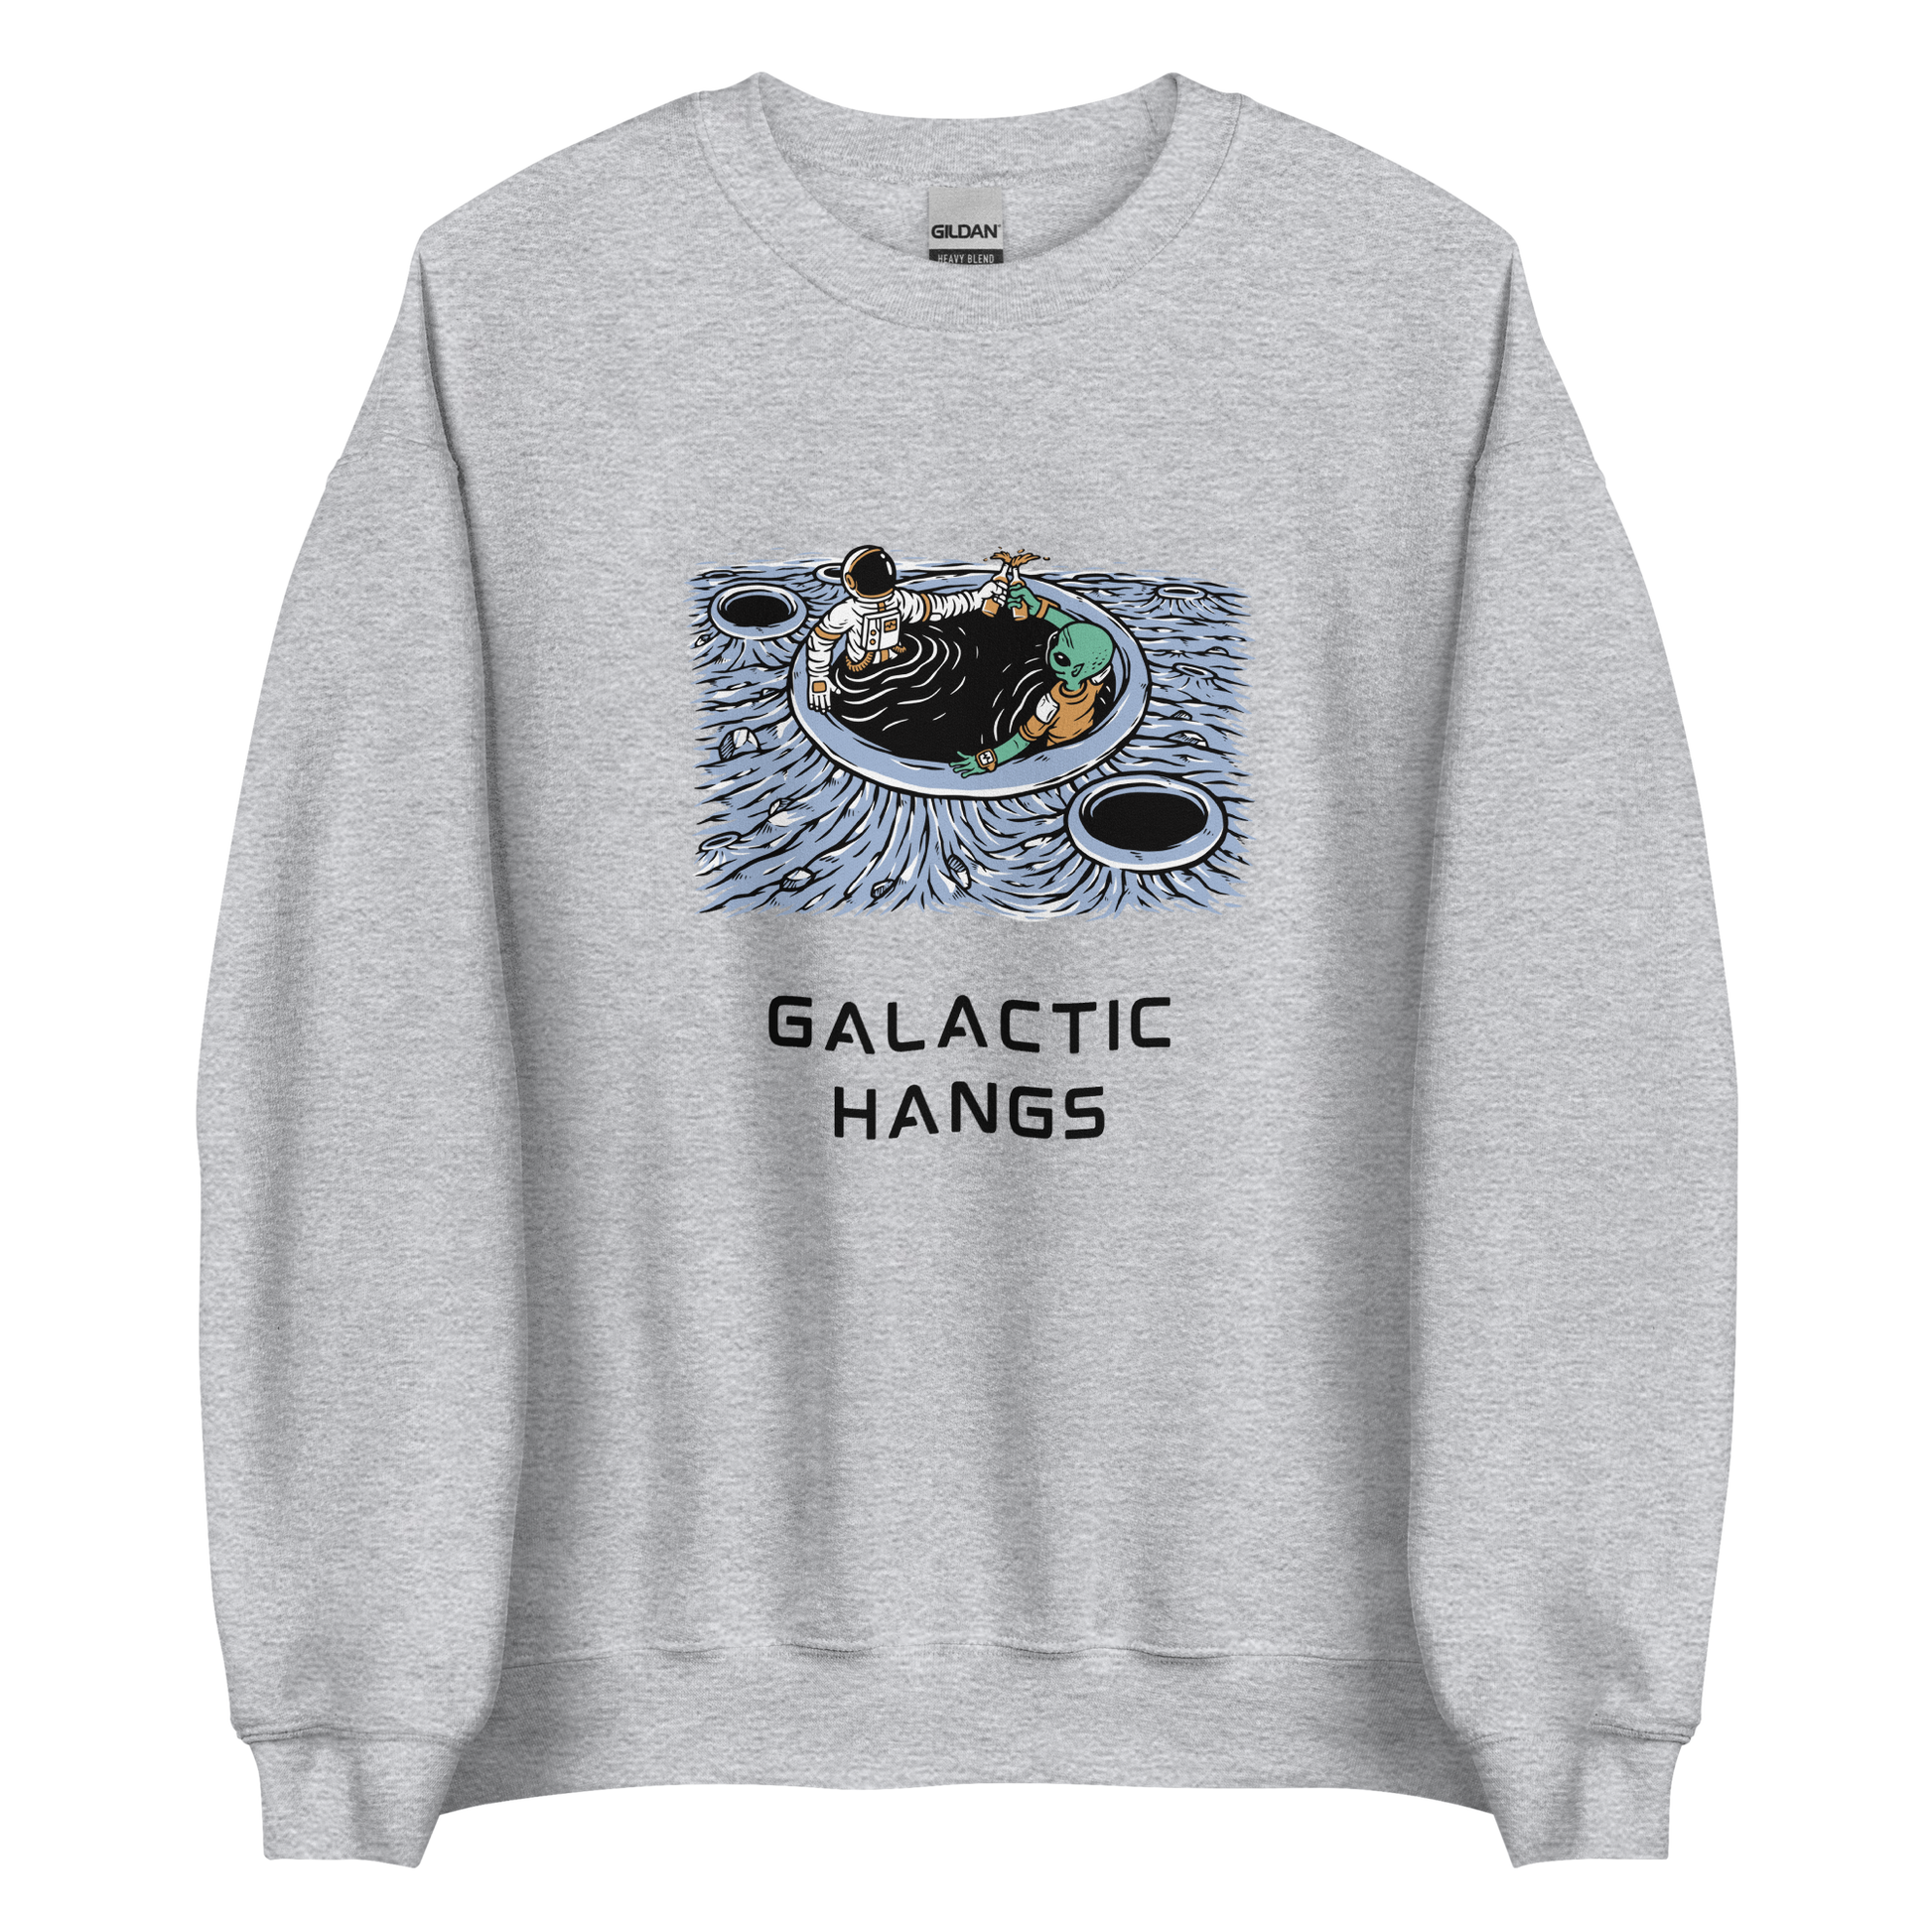 Sport Grey Galactic Hangs Sweatshirt featuring an out-of-this-world graphic of an Astronaut and Alien Chilling Together - Funny Graphic Space Sweatshirts - Boozy Fox